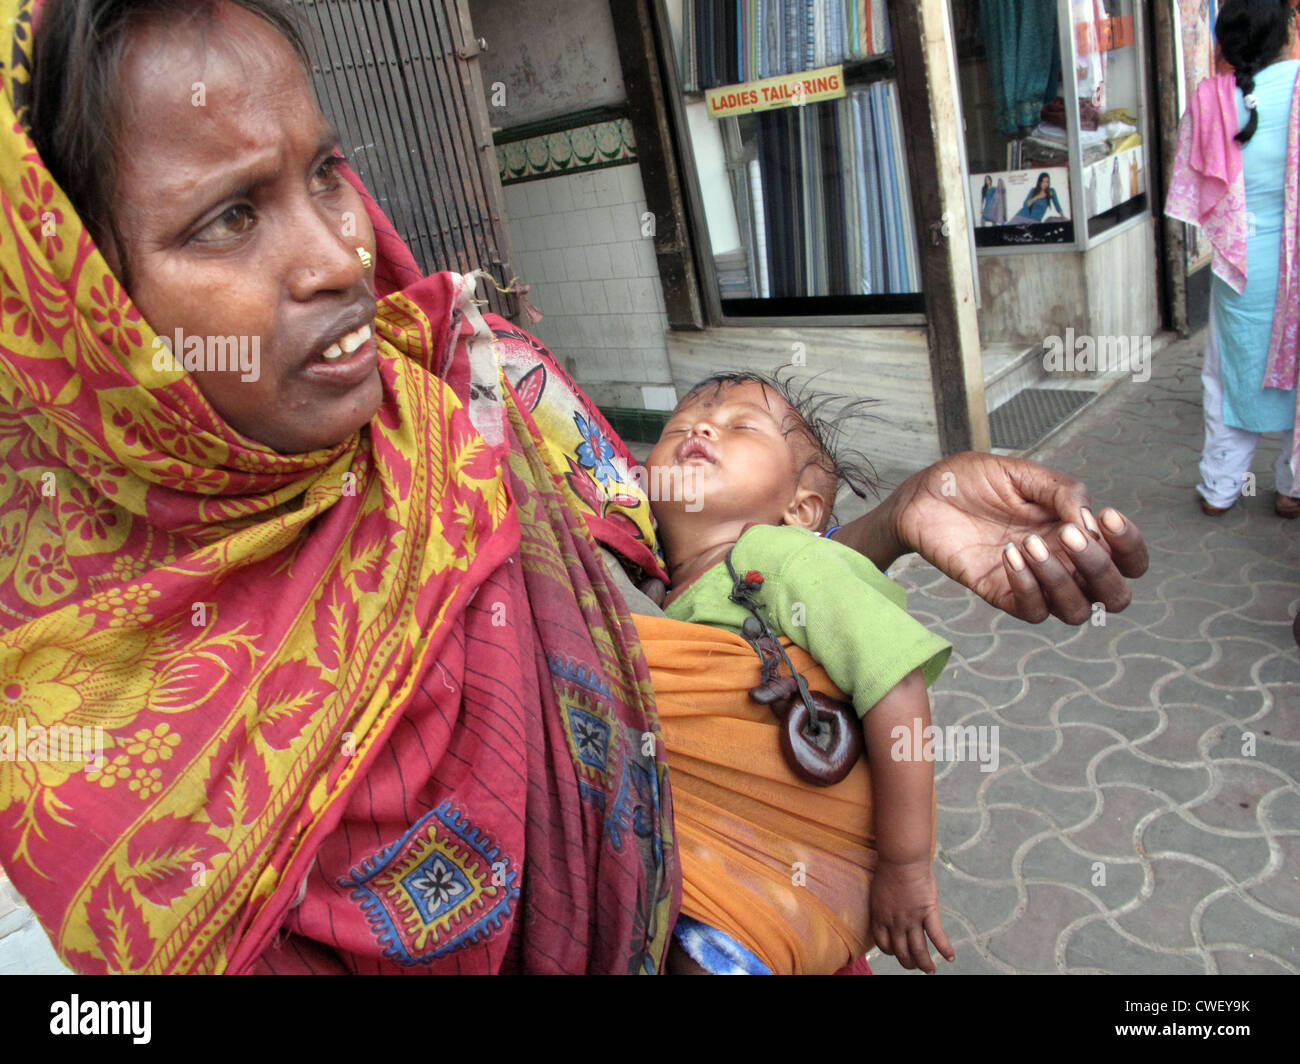 Streets of Kolkata. Thousands of beggars are the most disadvantaged castes living in the streets. Kolkata, India, Jan 28, 2009. Stock Photo